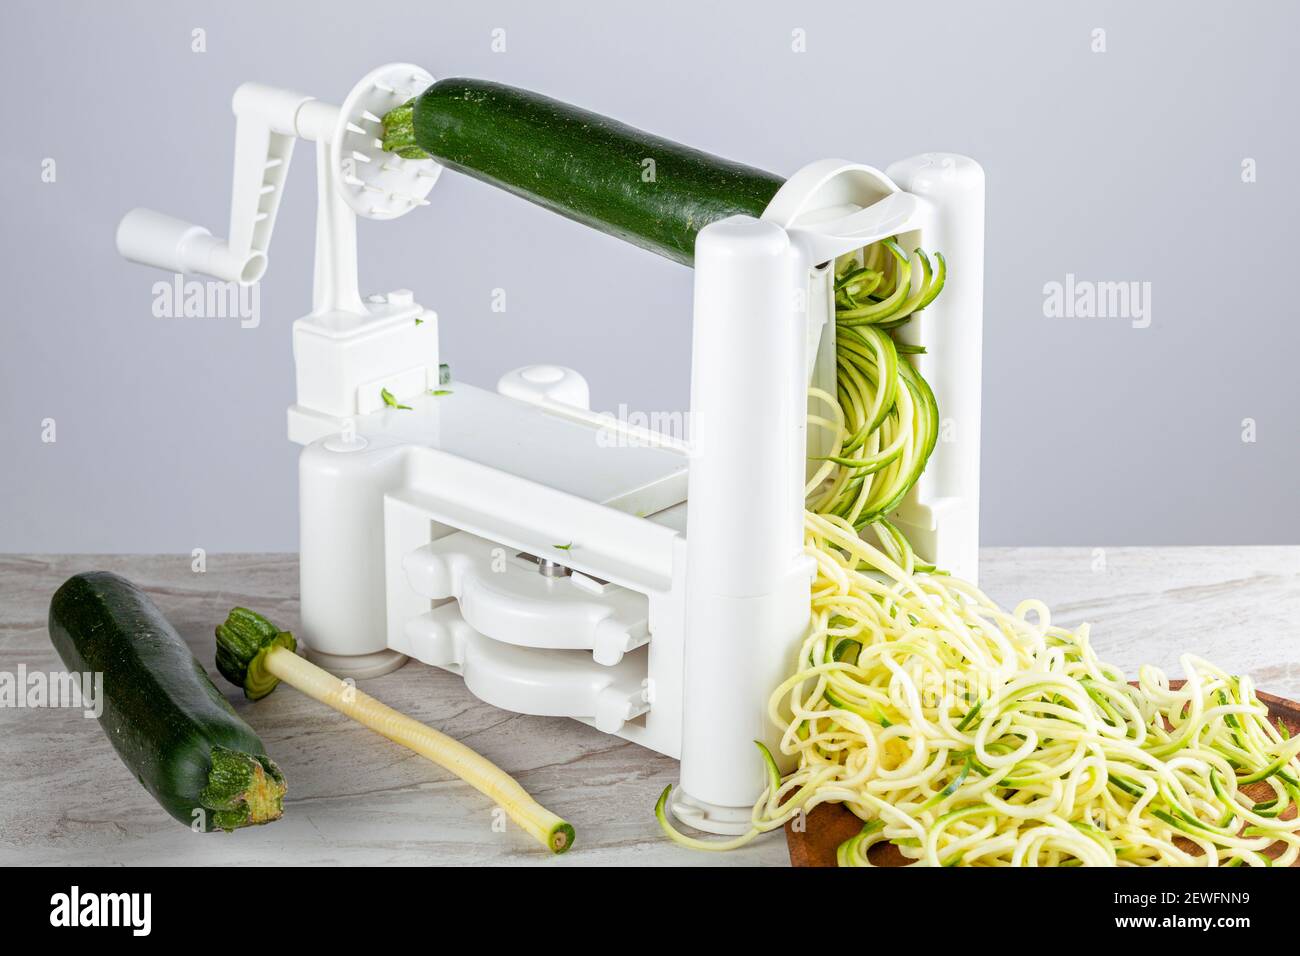 https://c8.alamy.com/comp/2EWFNN9/close-up-isolated-image-of-a-plastic-hand-operated-vegetable-slicer-spiralizer-on-kitchen-countertop-image-shows-zucchini-noodles-being-made-passing-2EWFNN9.jpg